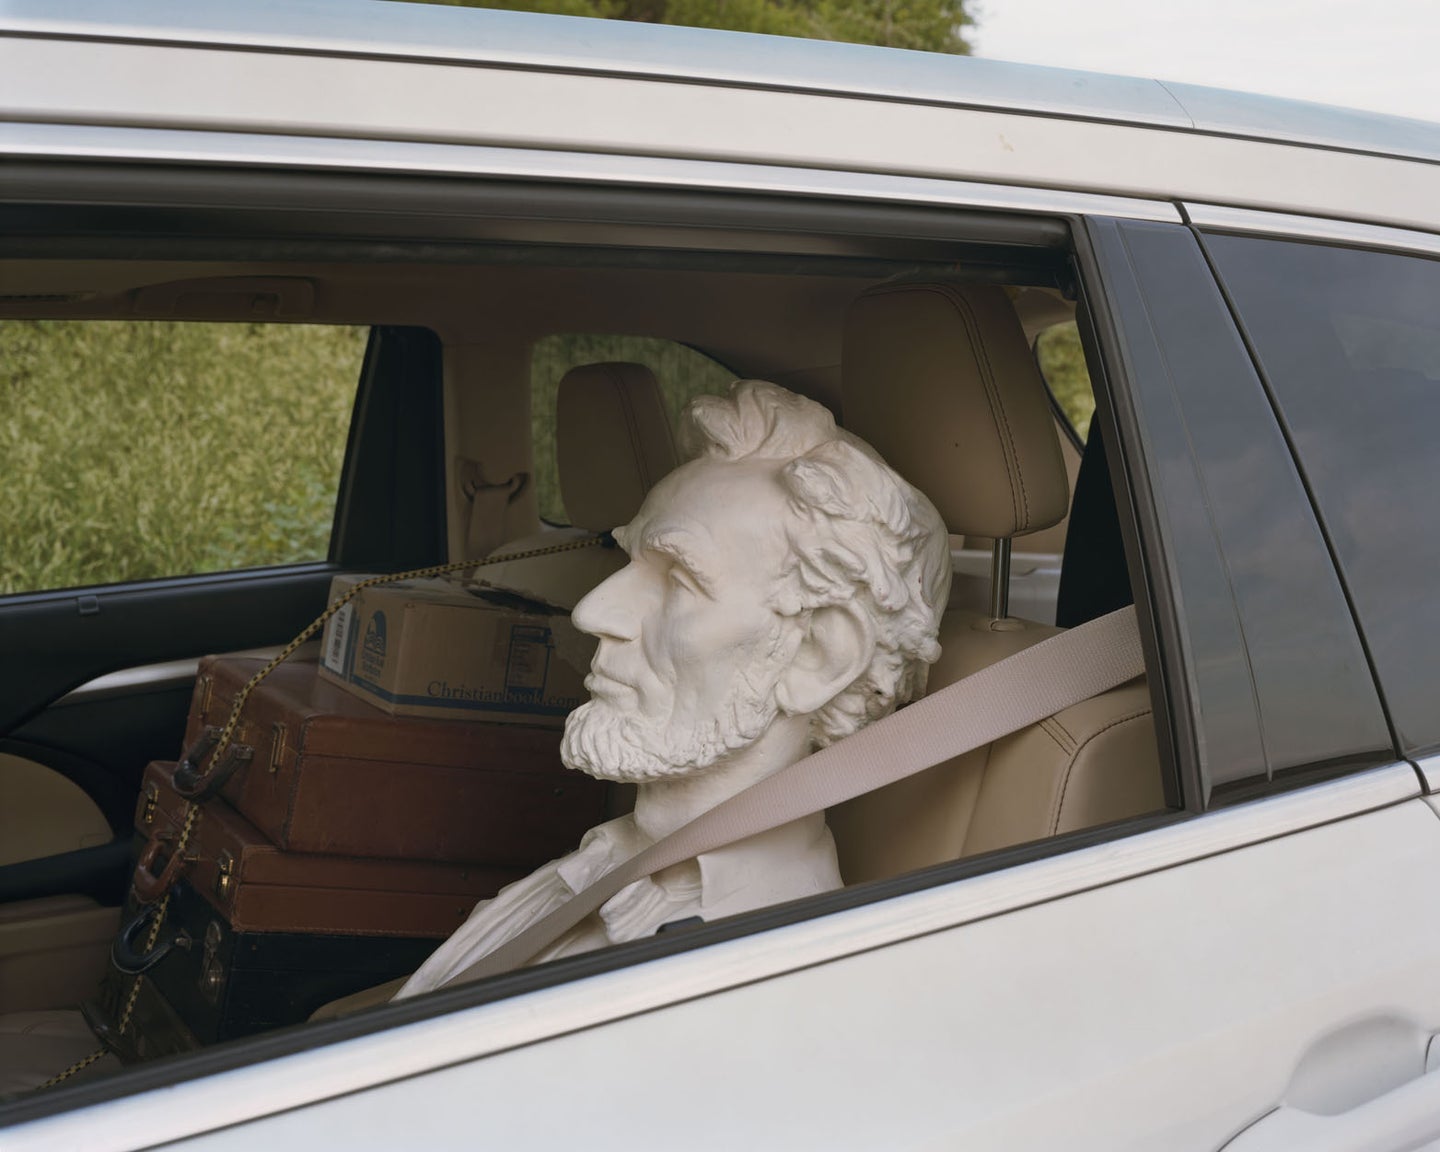 A bust of Abe Lincoln's head in the backseat of a car, window open.